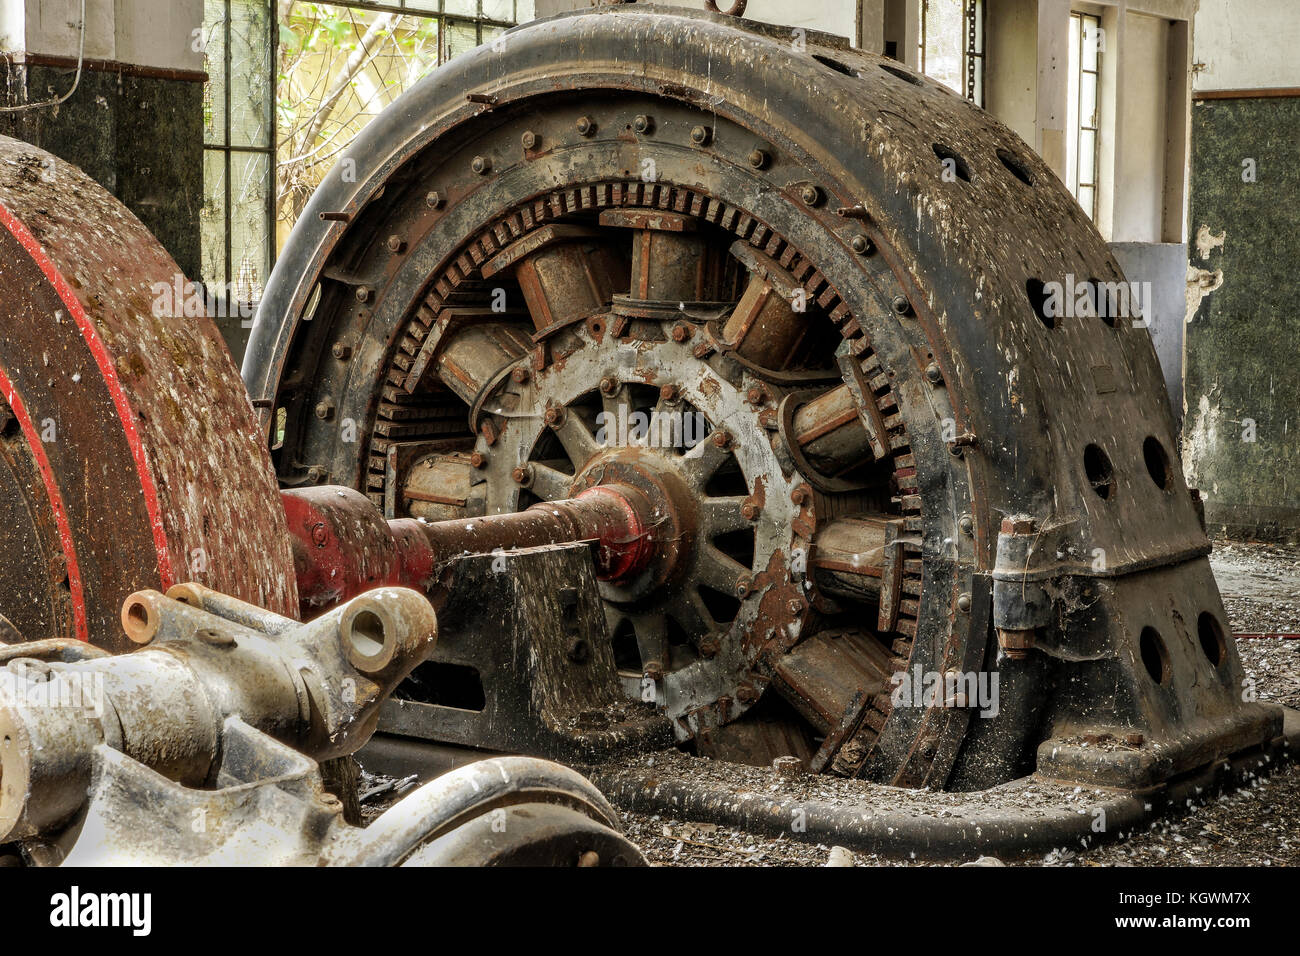 Turbine Old Hydroelectric Power Station Stock Photos & Turbine Old ...